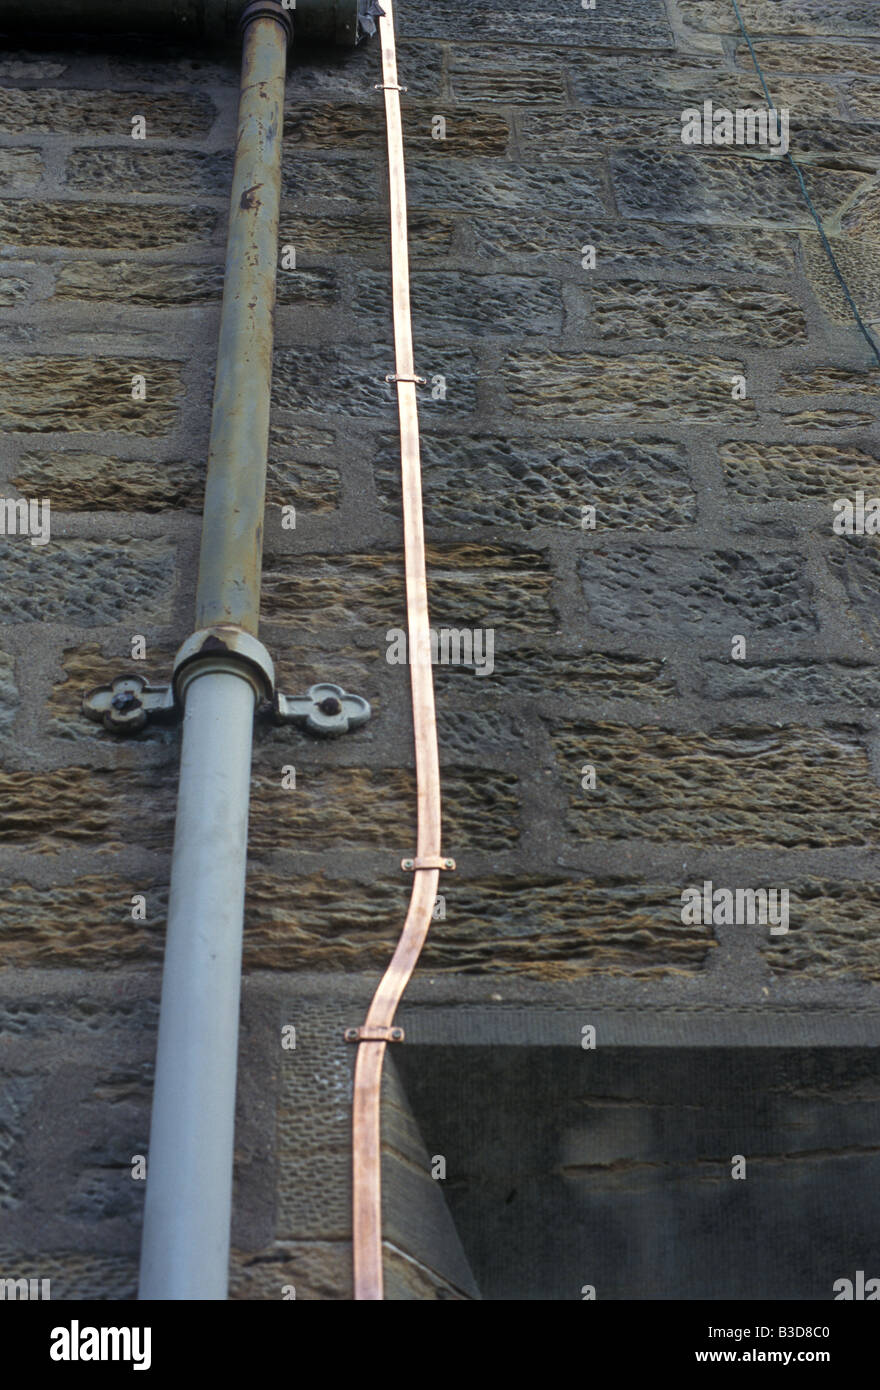 A shiny new copper lightning conductor Stock Photo